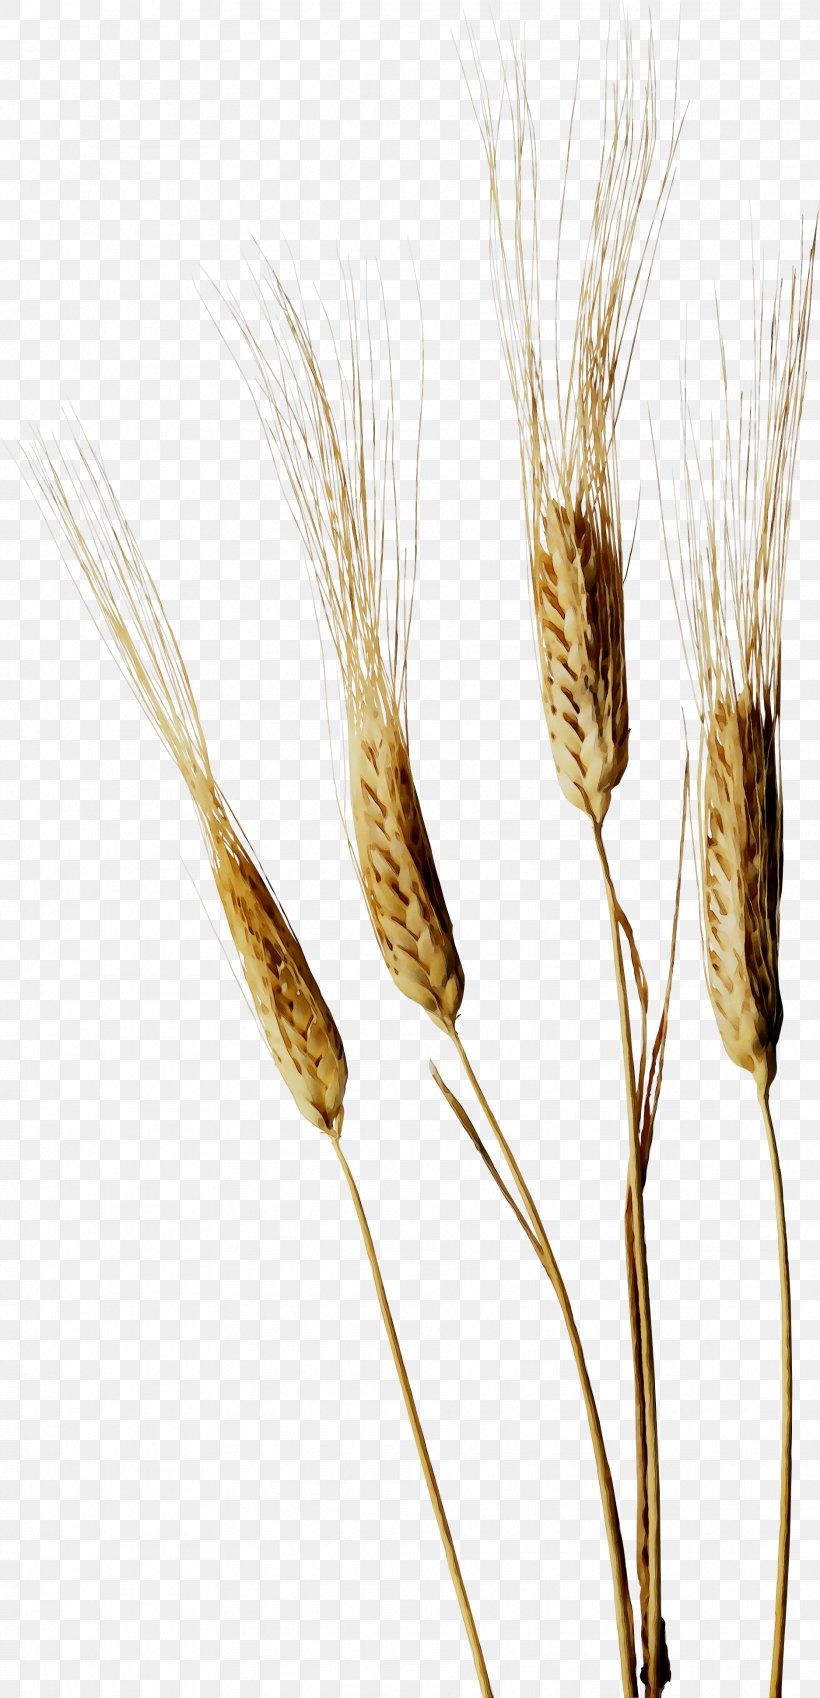 Emmer Einkorn Wheat Cereal Grain Caryopsis, PNG, 1874x3882px, Emmer, Agriculture, Barley, Barleys, Caryopsis Download Free